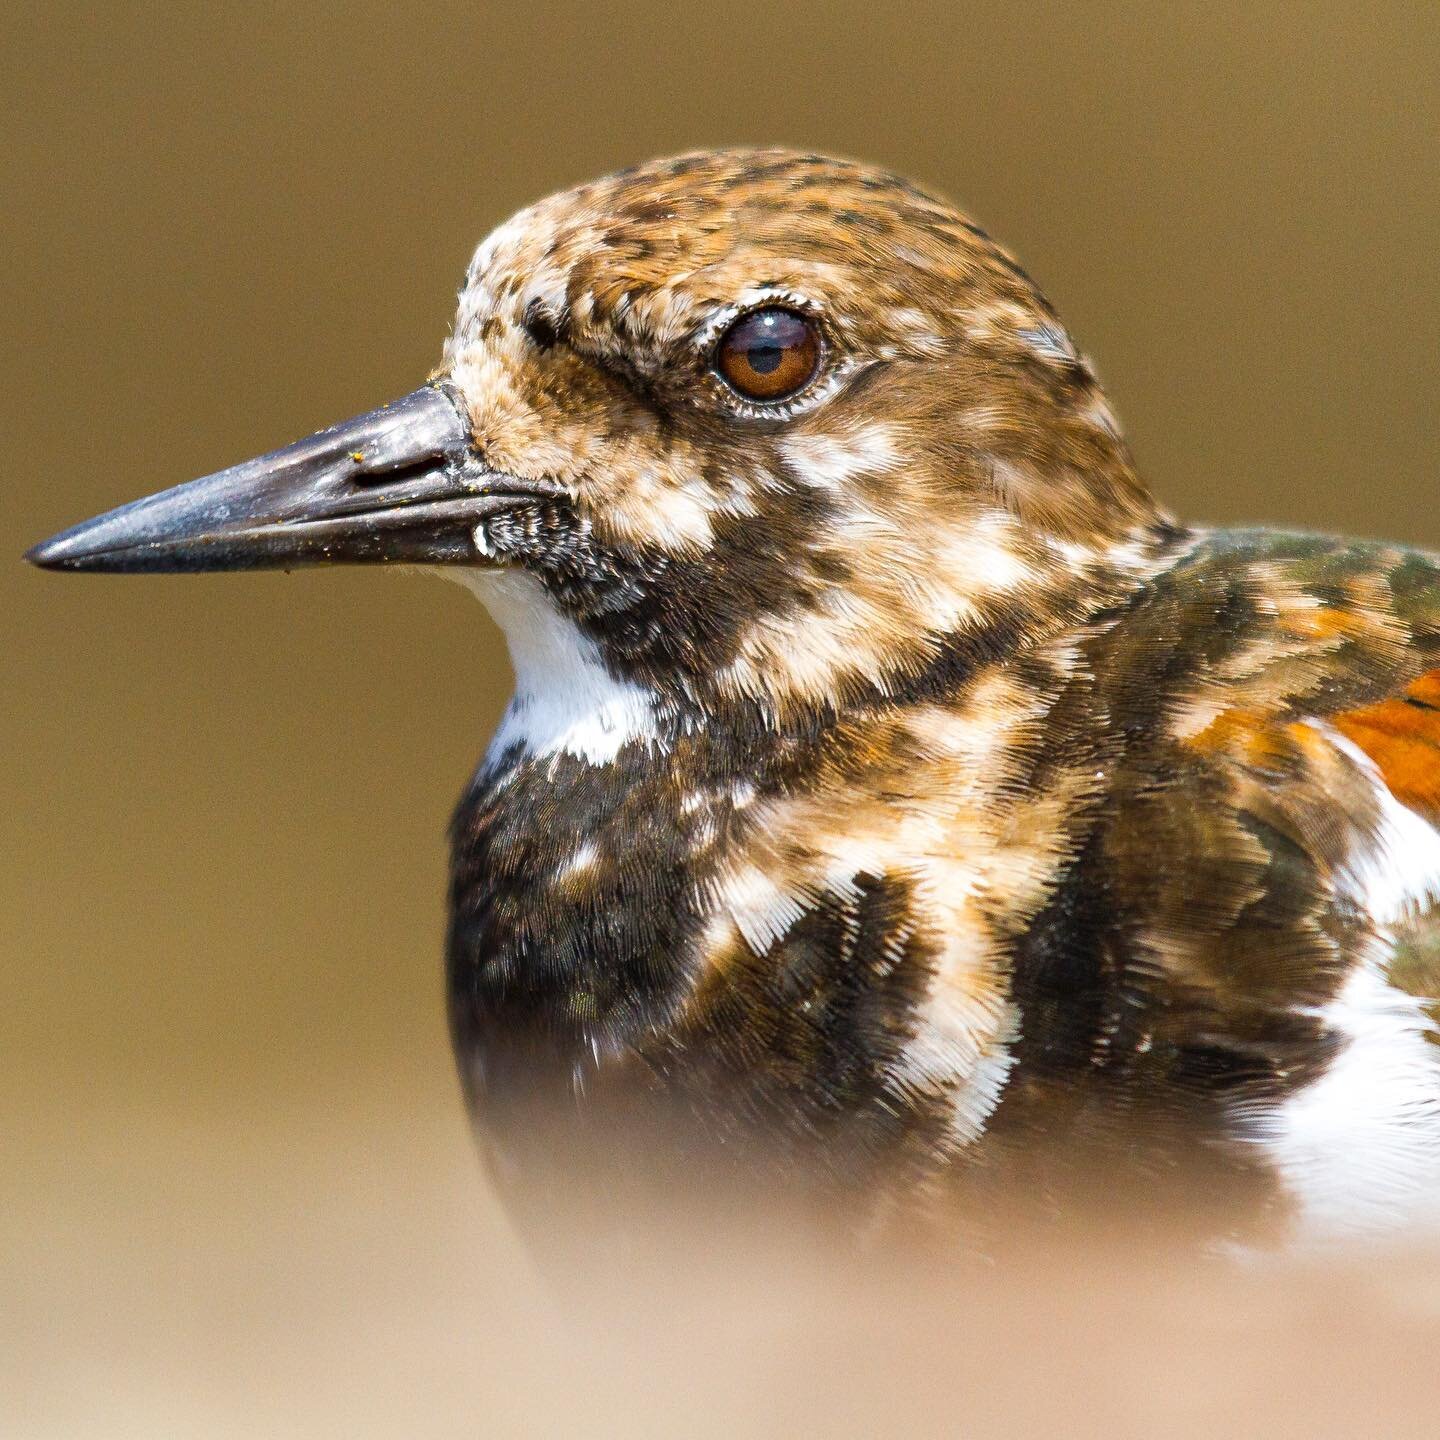 A close up of a beautifully coloured turnstone perched upon a rock on the wild Cornish coast. 🥰🐦
.
.
.
.
.
#winterwatch #turnstone #EarthOnLocation #EarthCapture #nb_nature_brilliance #youngnaturephotographers #wildlife #snow #wildlifephotography #